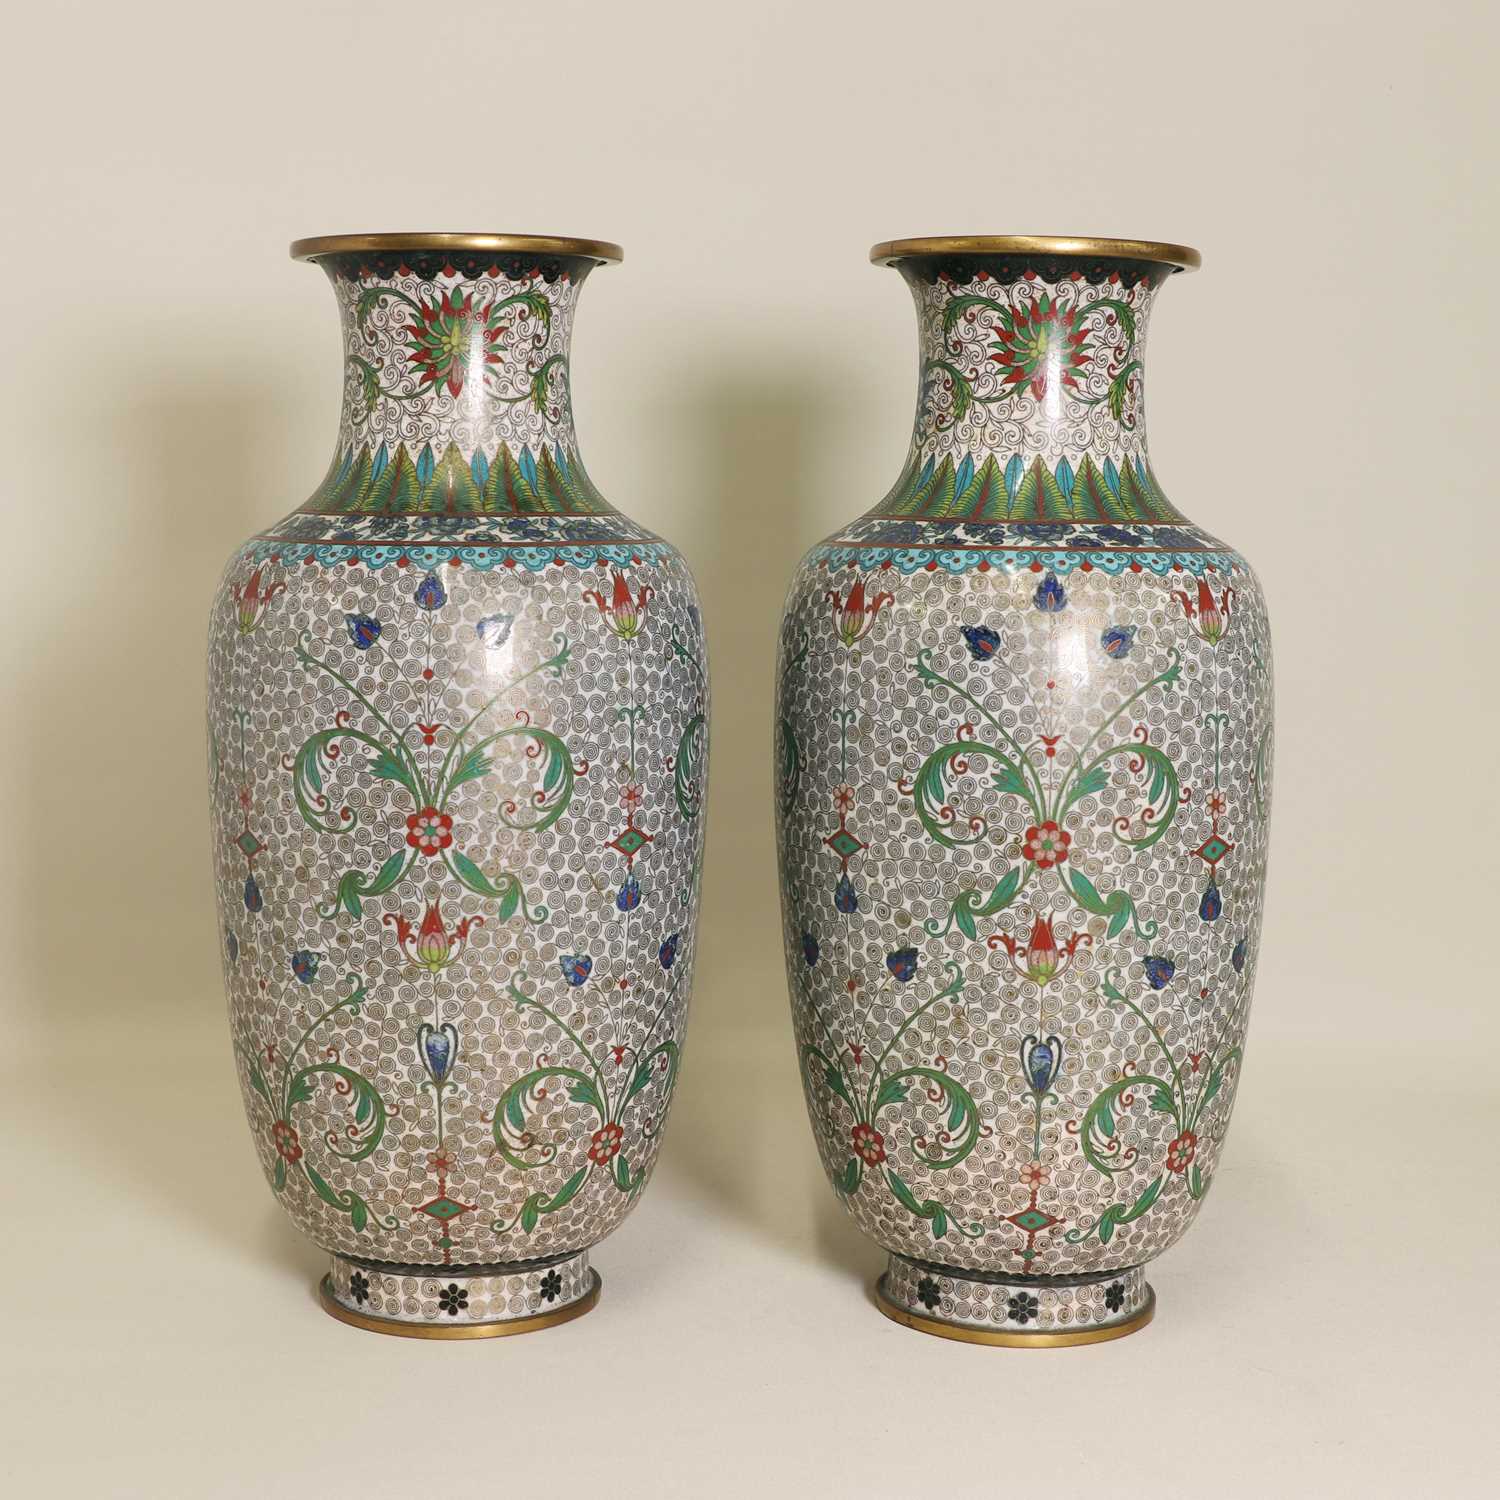 Lot 93 - A pair of Chinese cloisonné vases